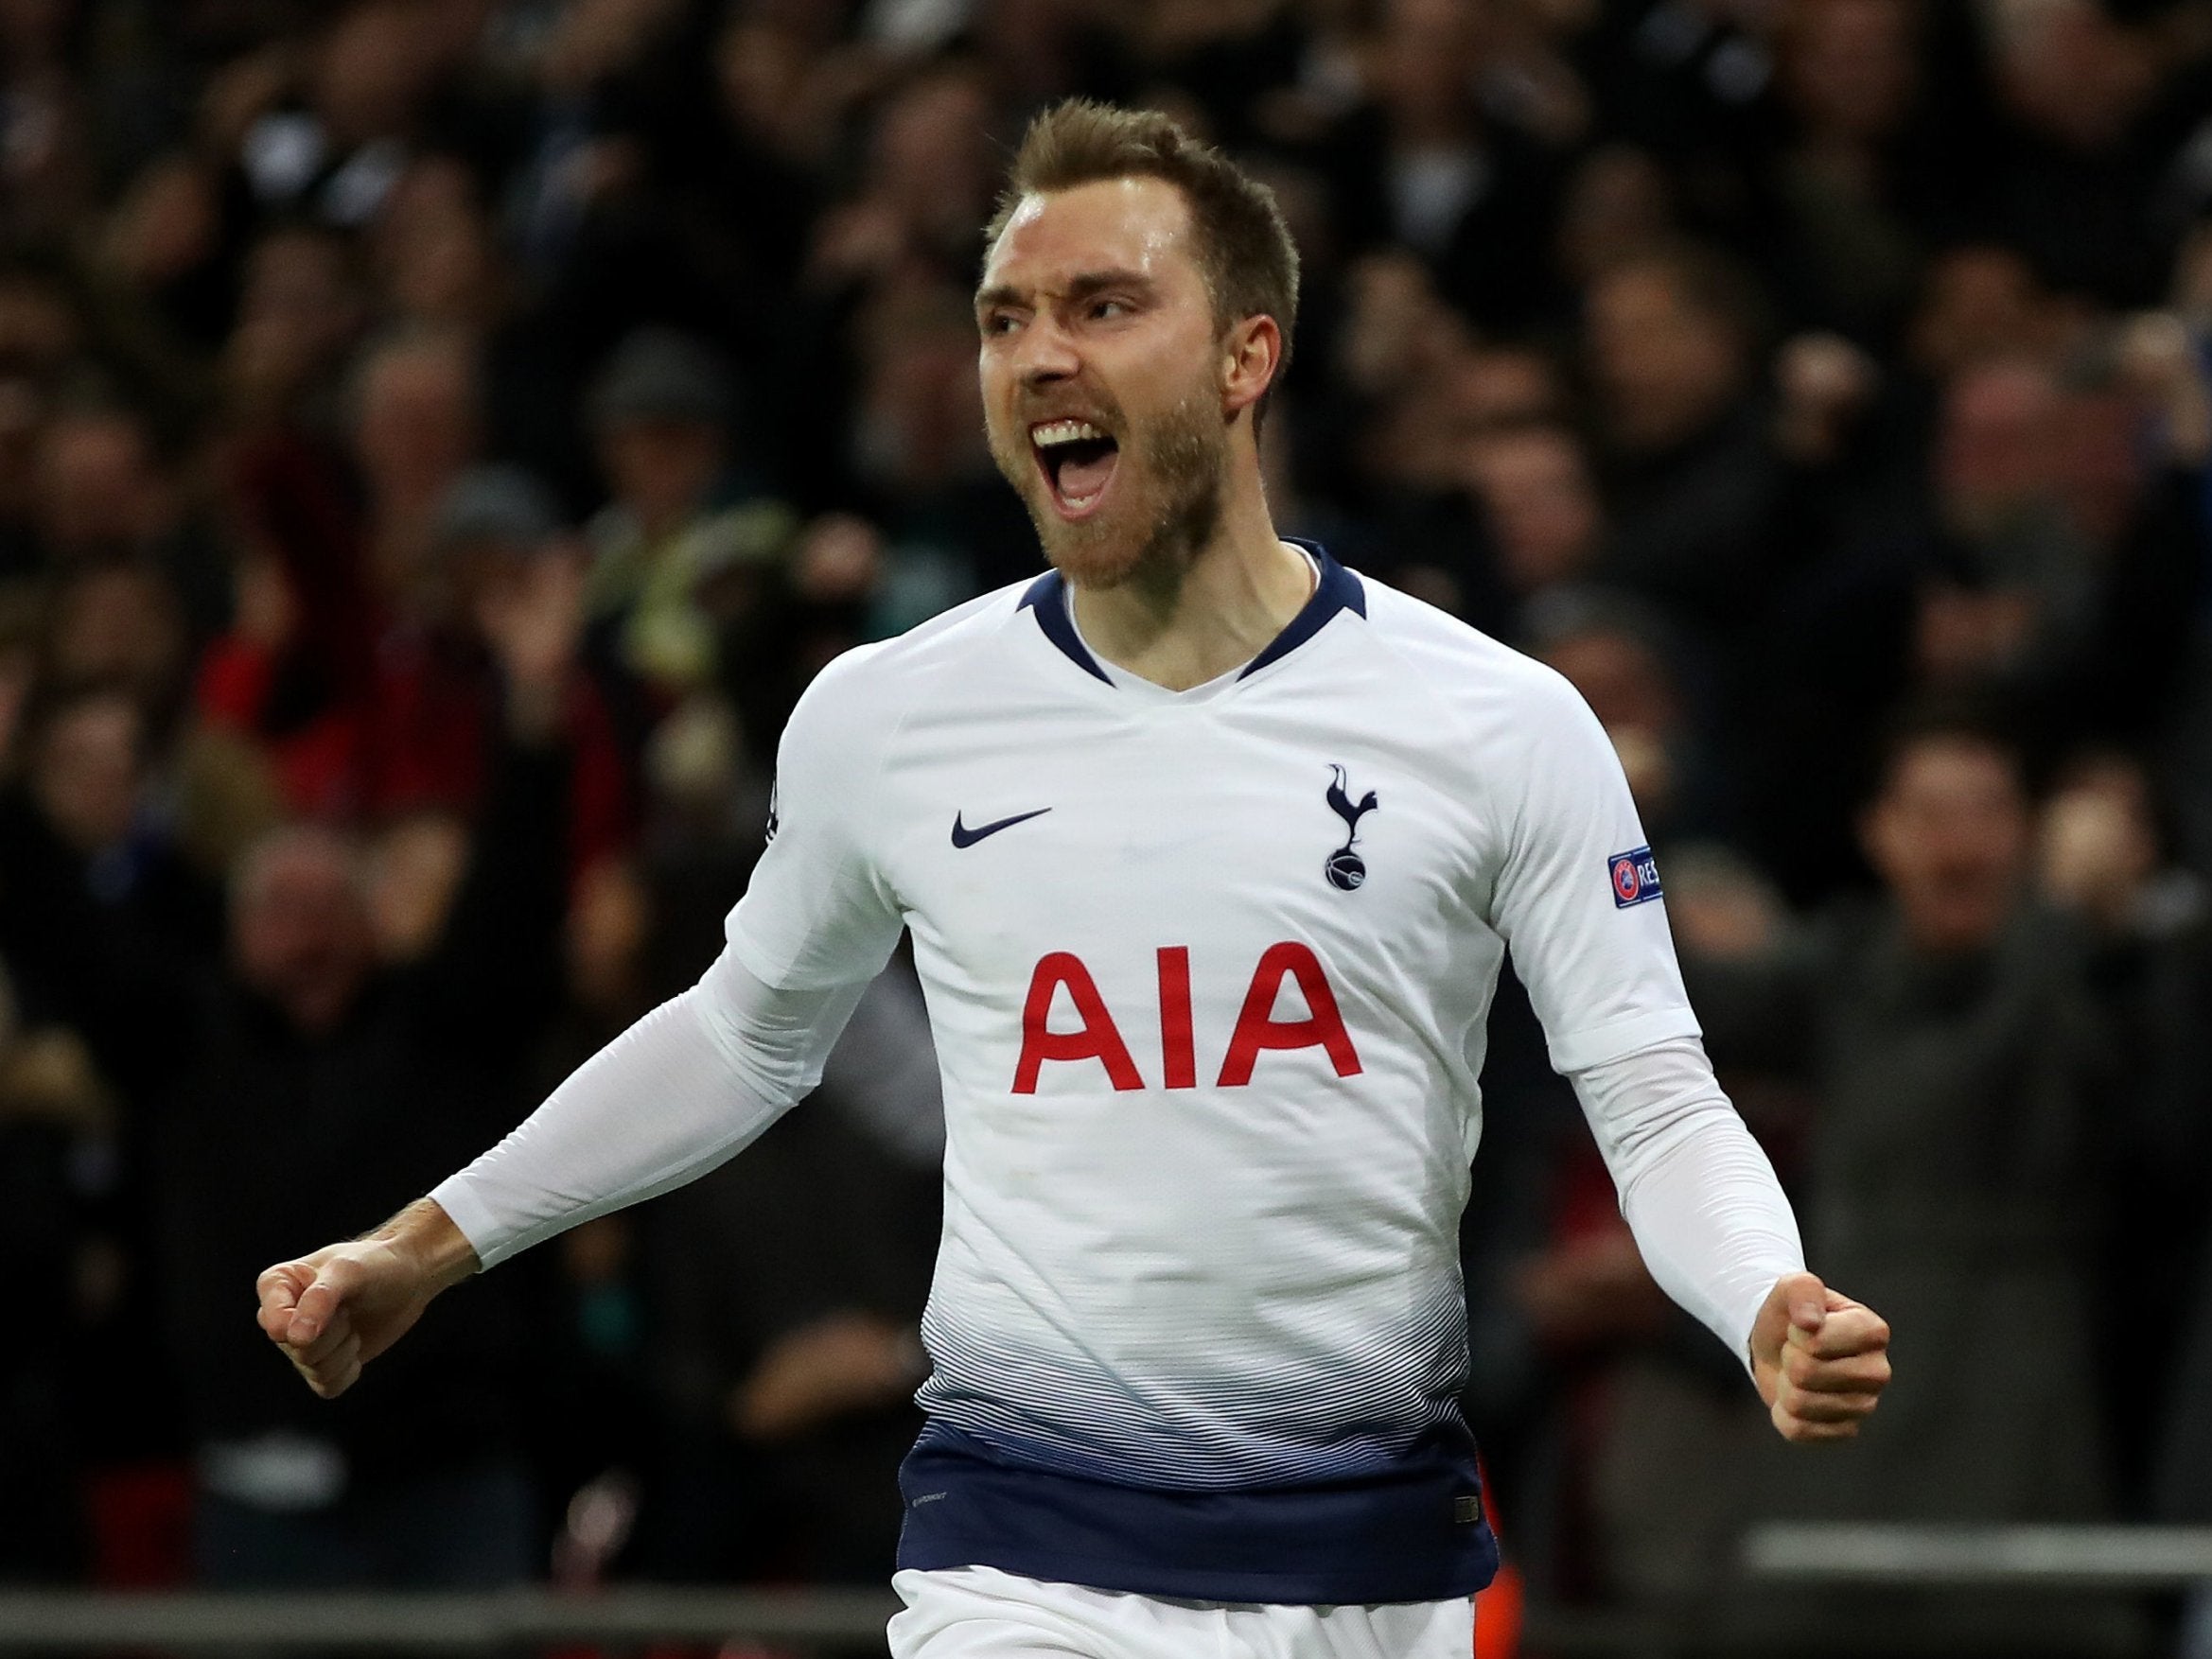 Eriksen made a decisive difference for Tottenham against Inter Milan